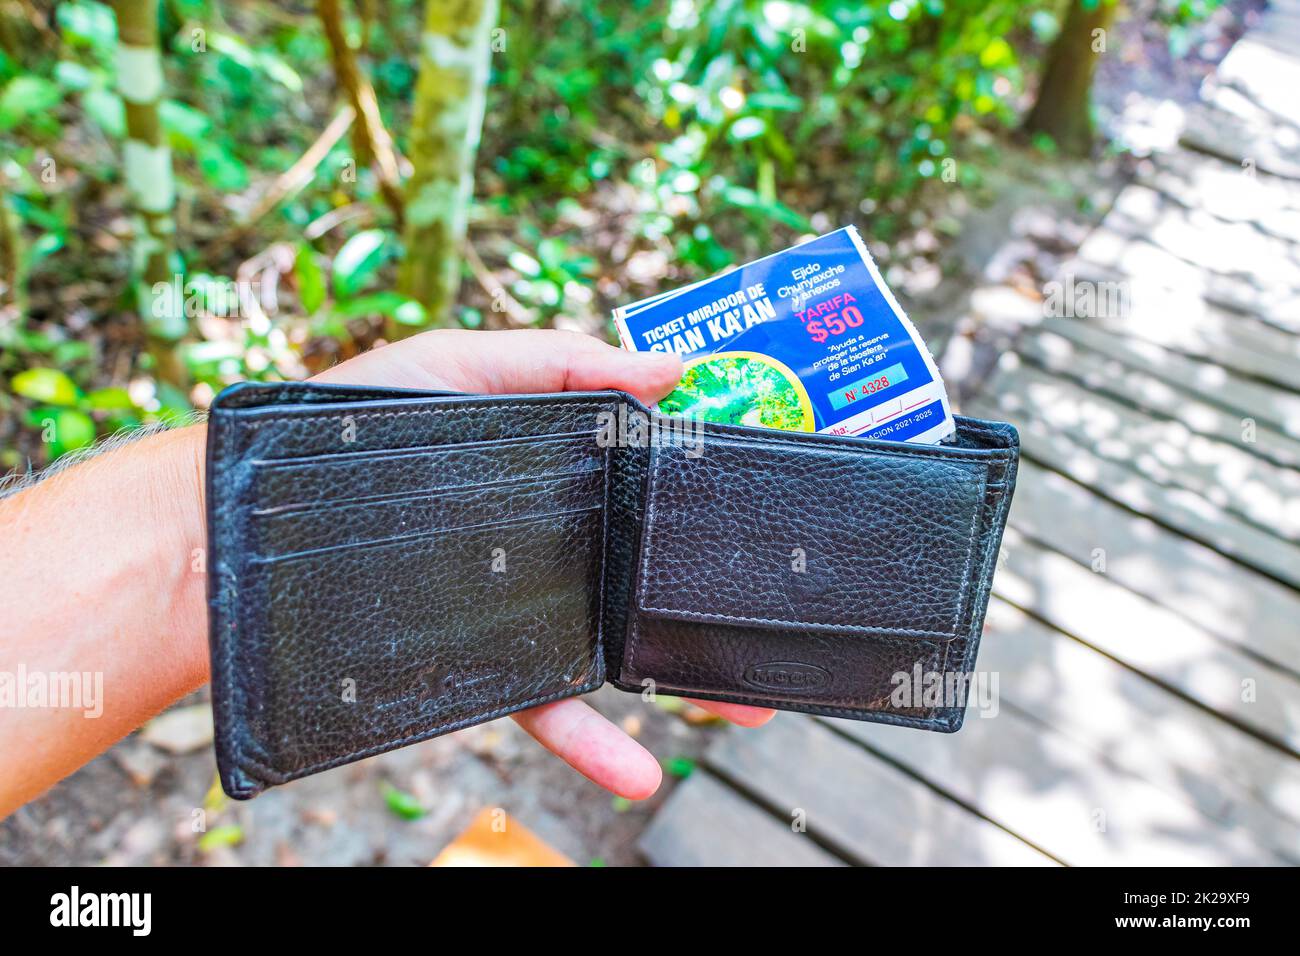 Wallet with entrance ticket to Sian Kaan National Park Mexico. Stock Photo